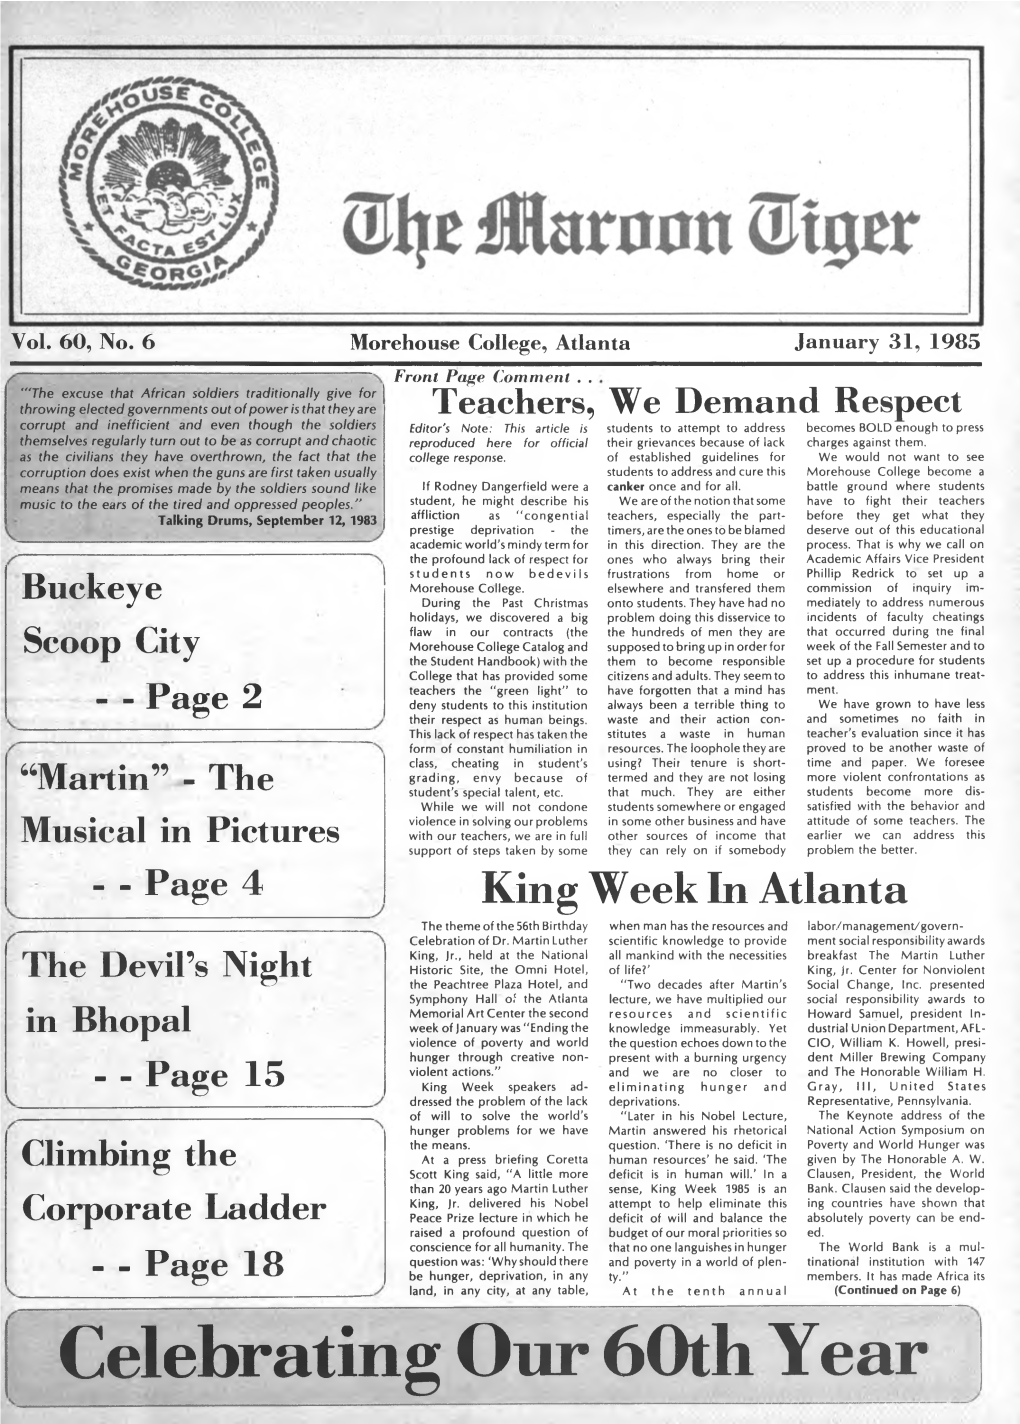 Celebrating Our 60Th Year January 31, 1985/The Maroon Tiger/Page 2 by Freddie Asinor, Editor-In-Chief the Buckeye Scoop City